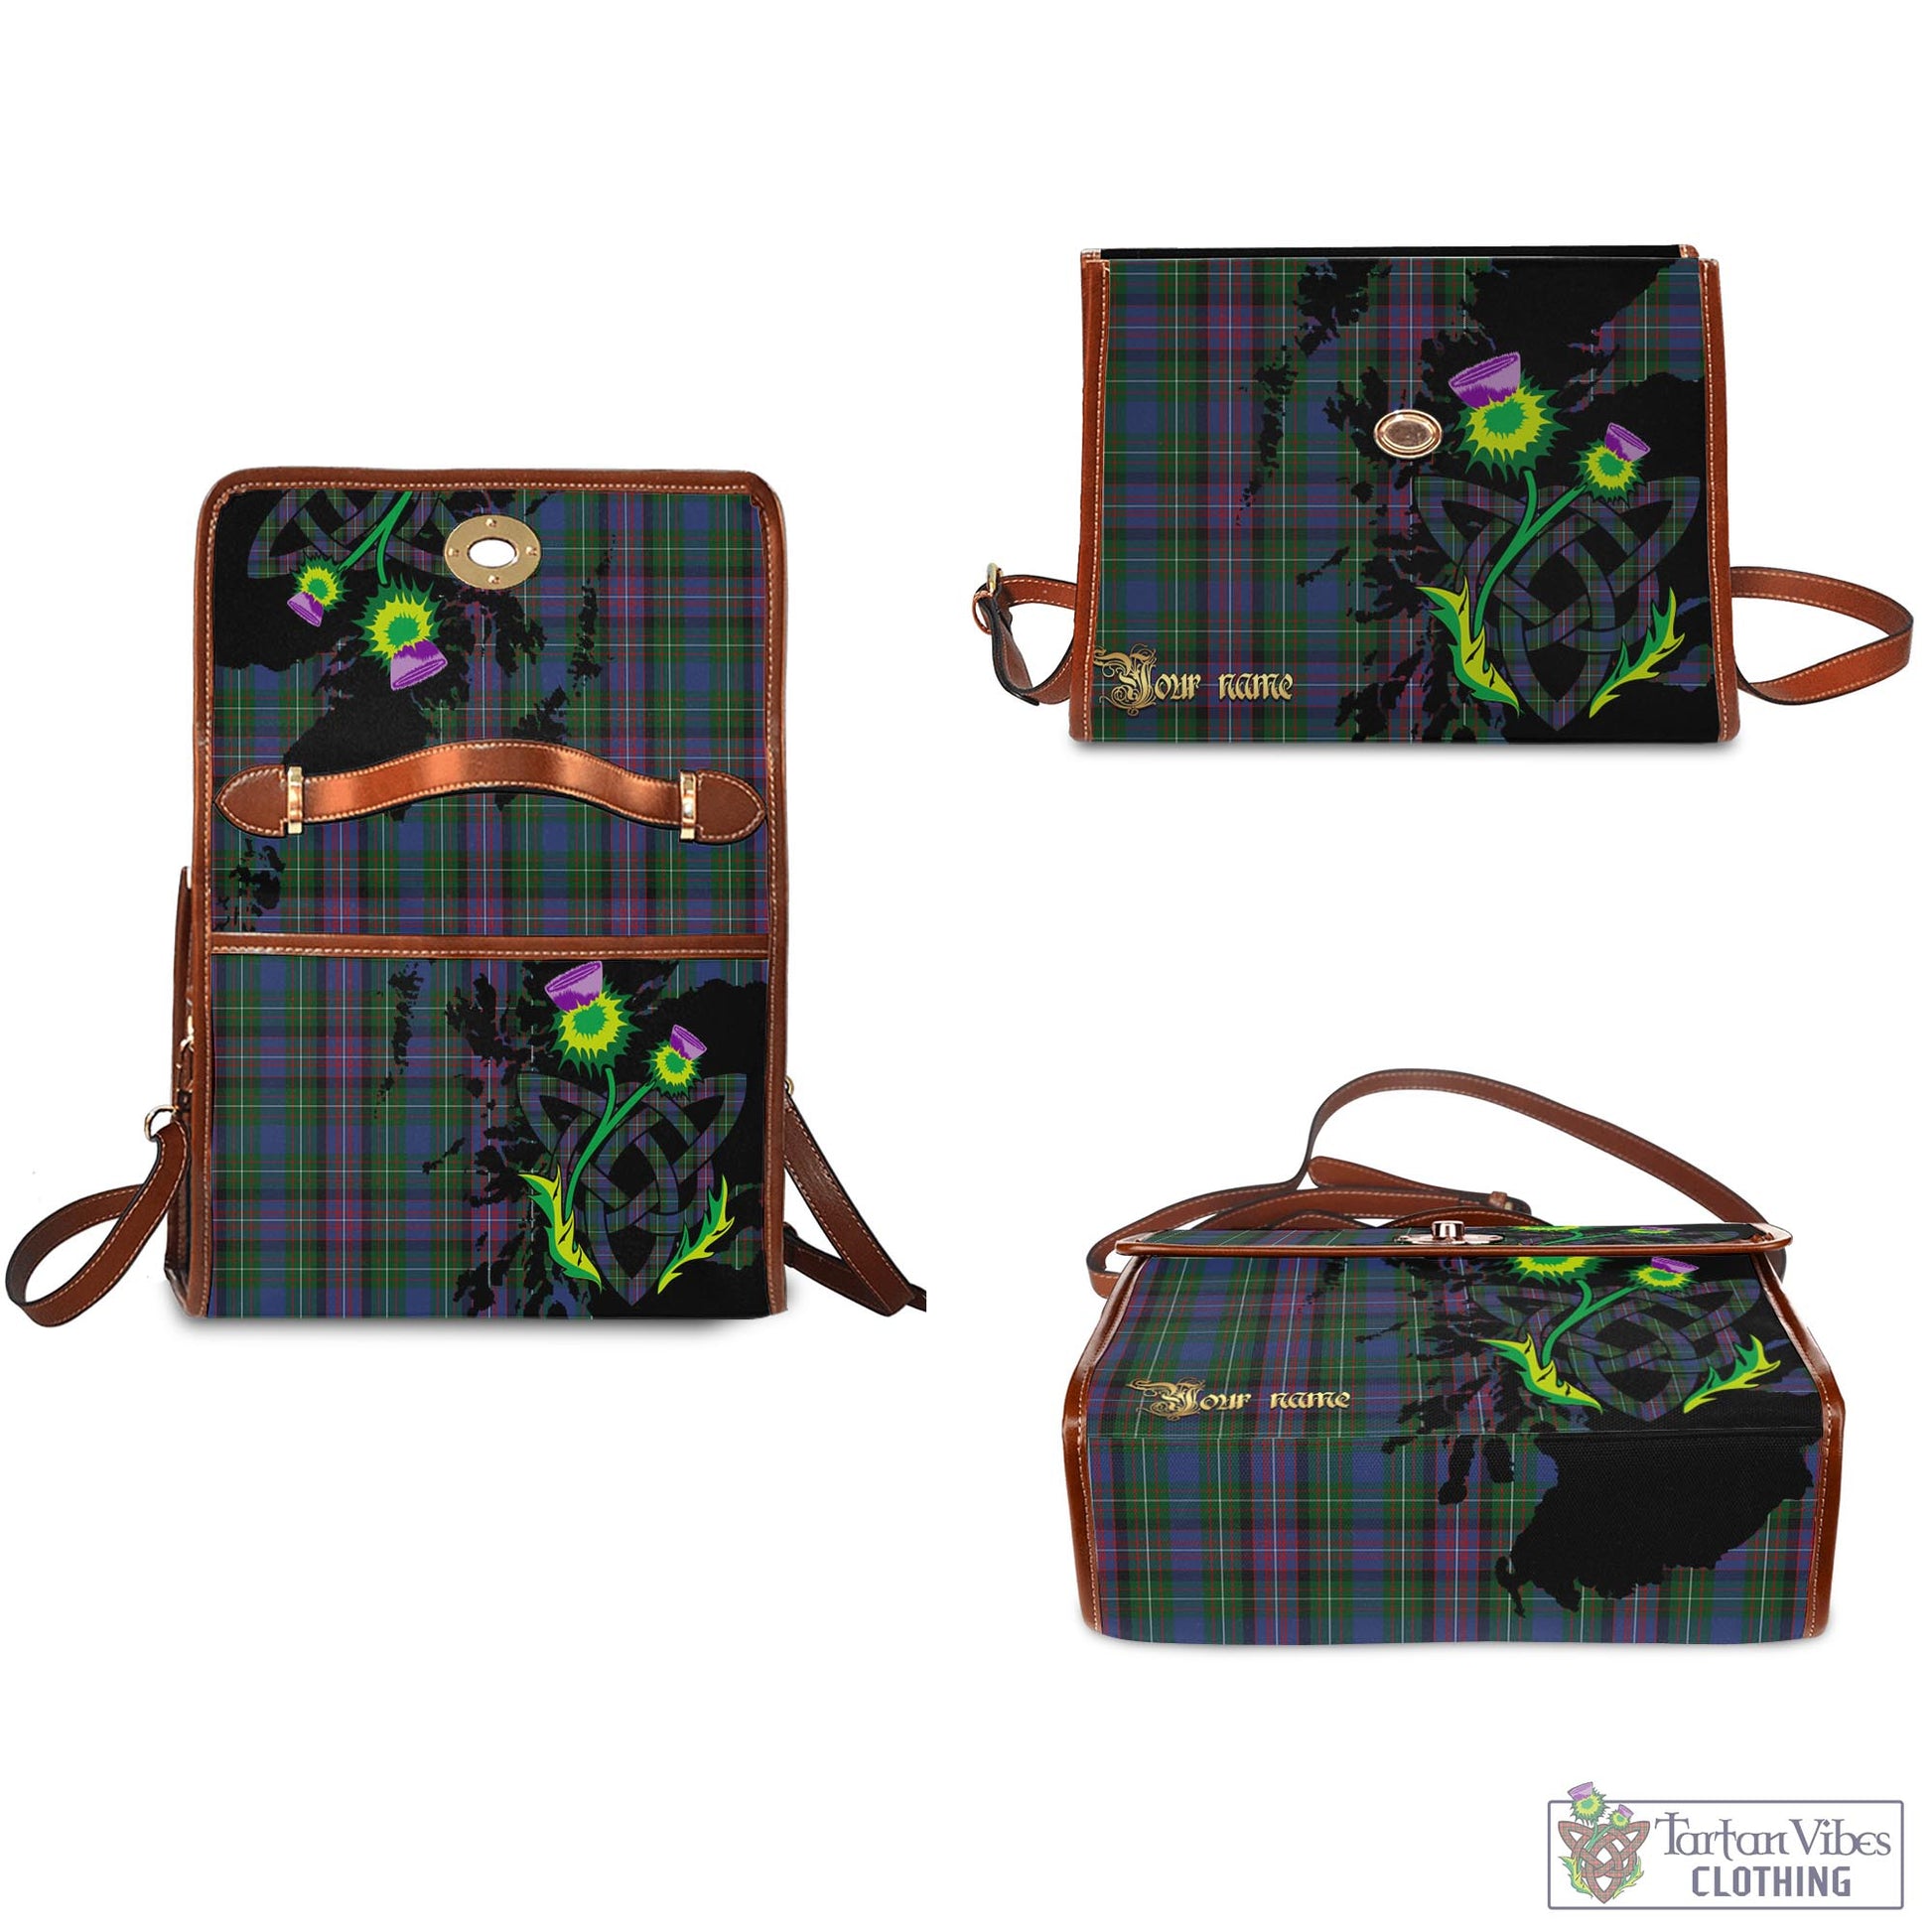 Tartan Vibes Clothing Rankin Tartan Waterproof Canvas Bag with Scotland Map and Thistle Celtic Accents